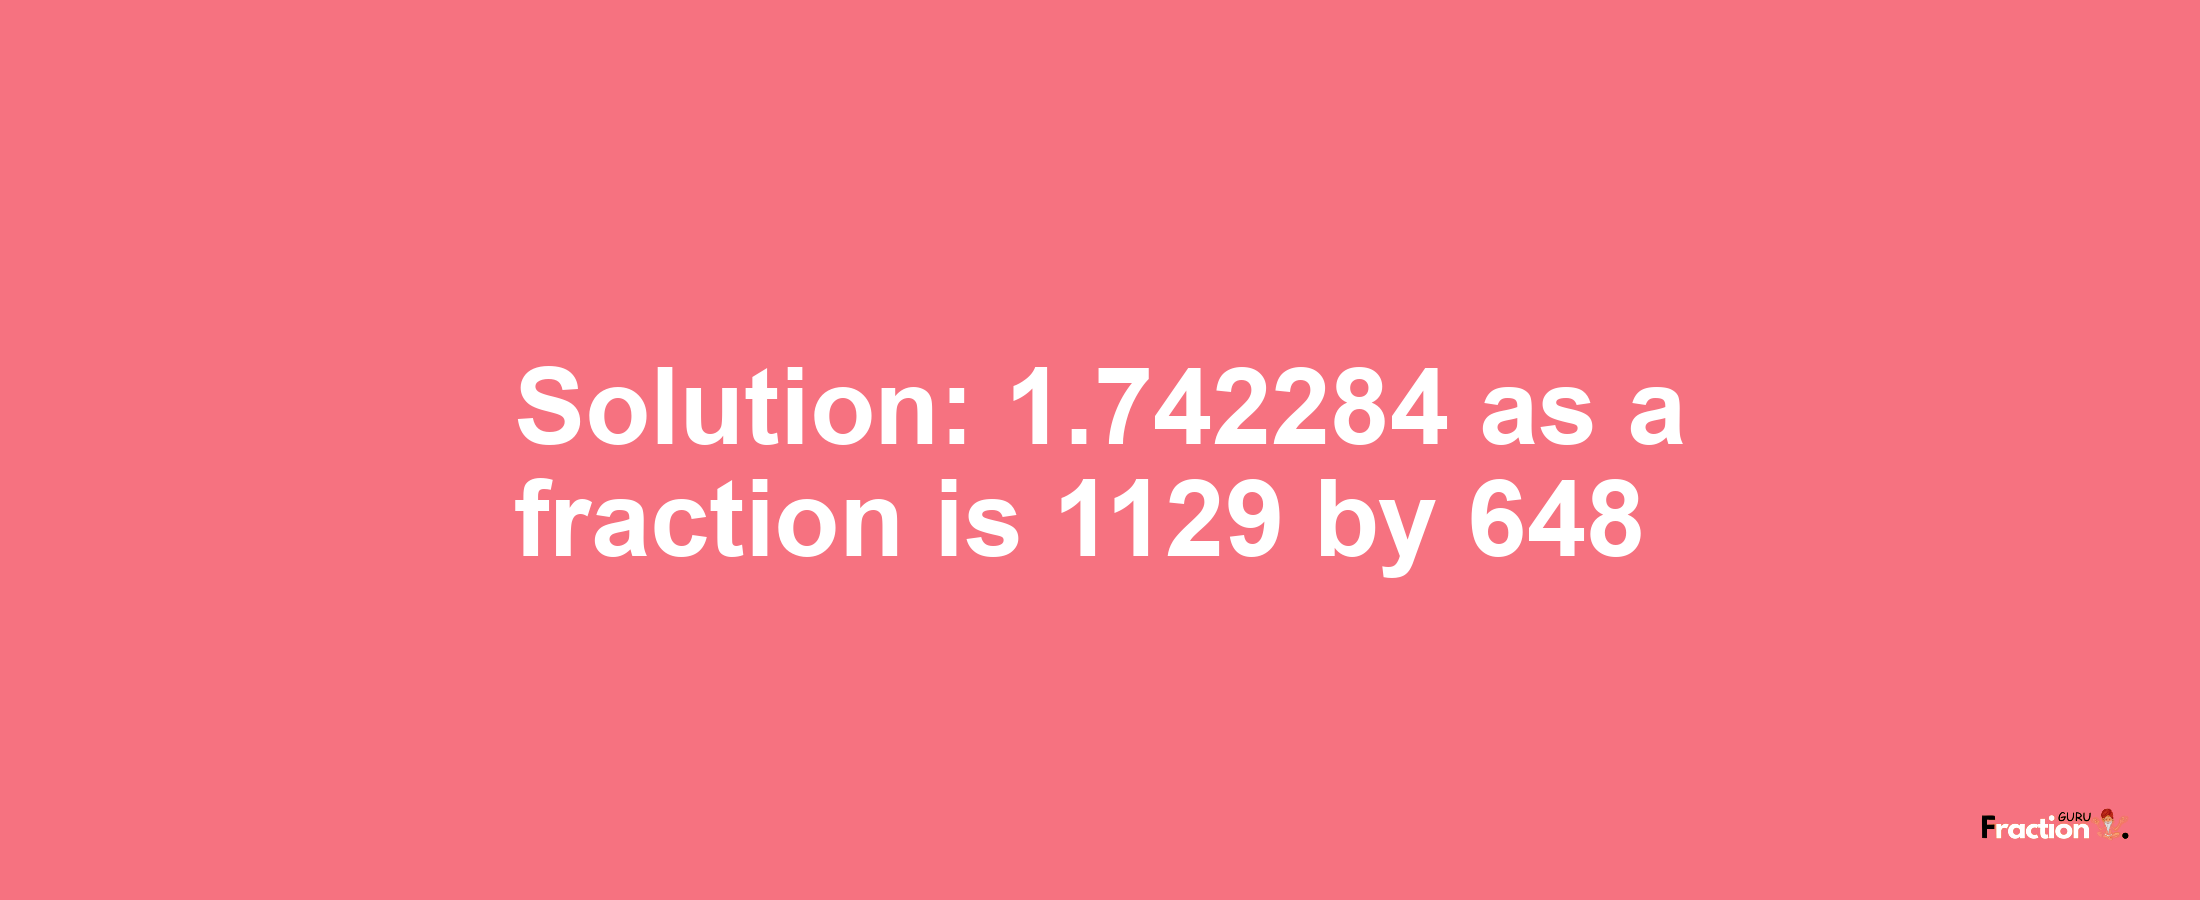 Solution:1.742284 as a fraction is 1129/648